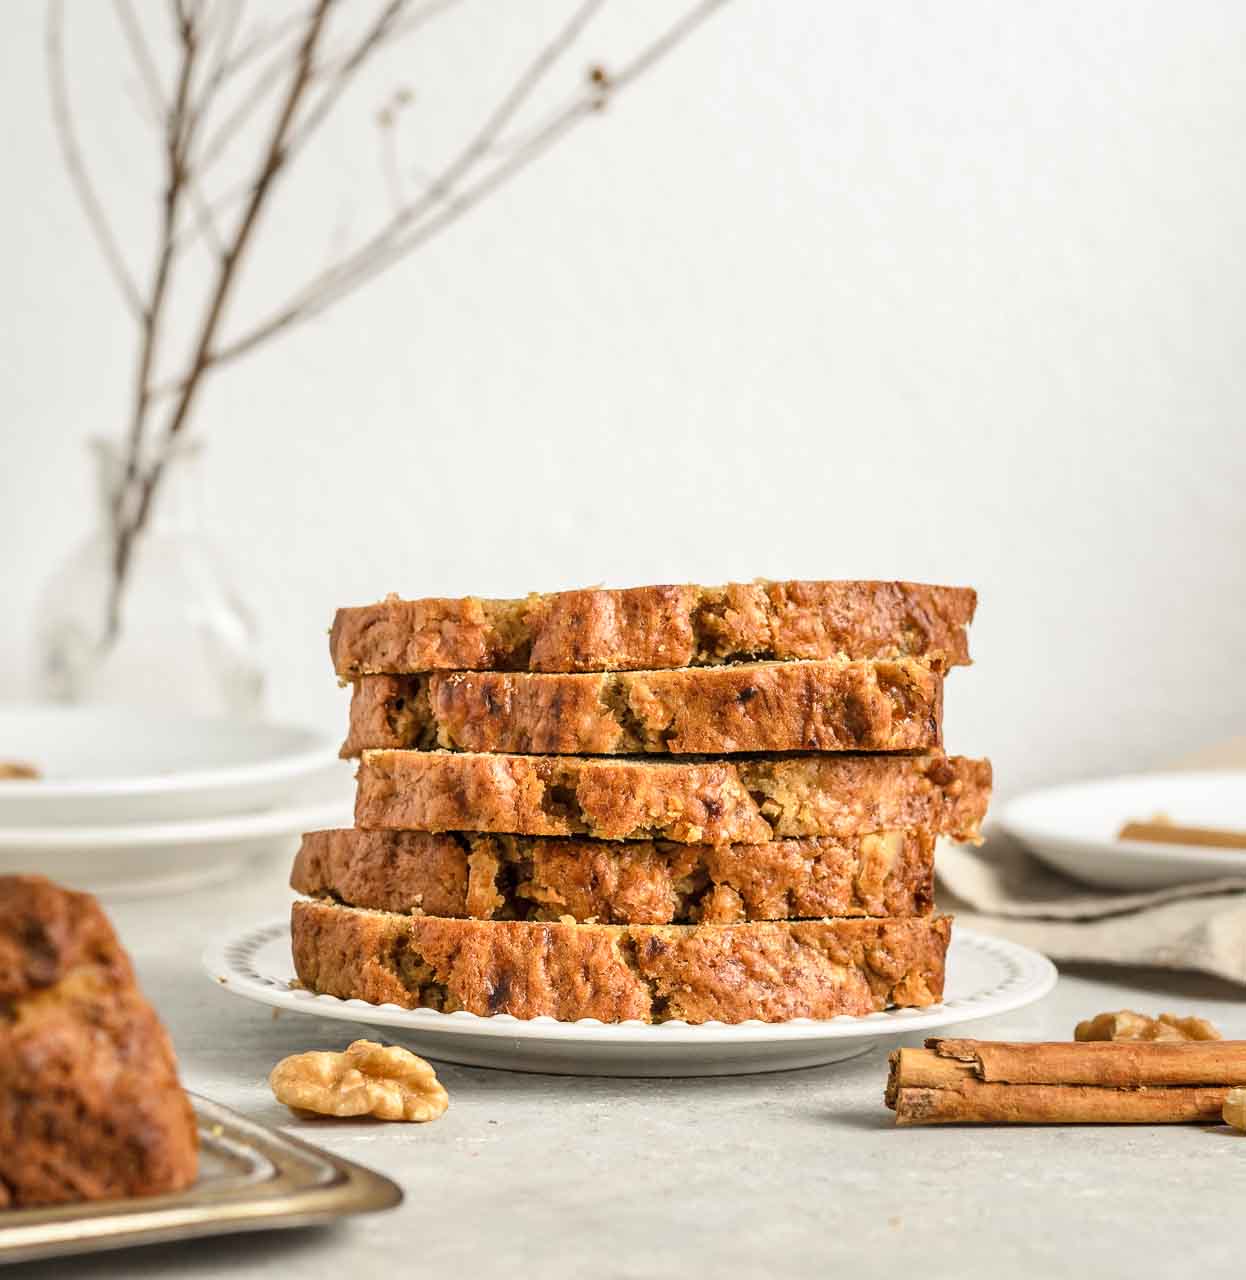 Rum Guava Bread with Nuts